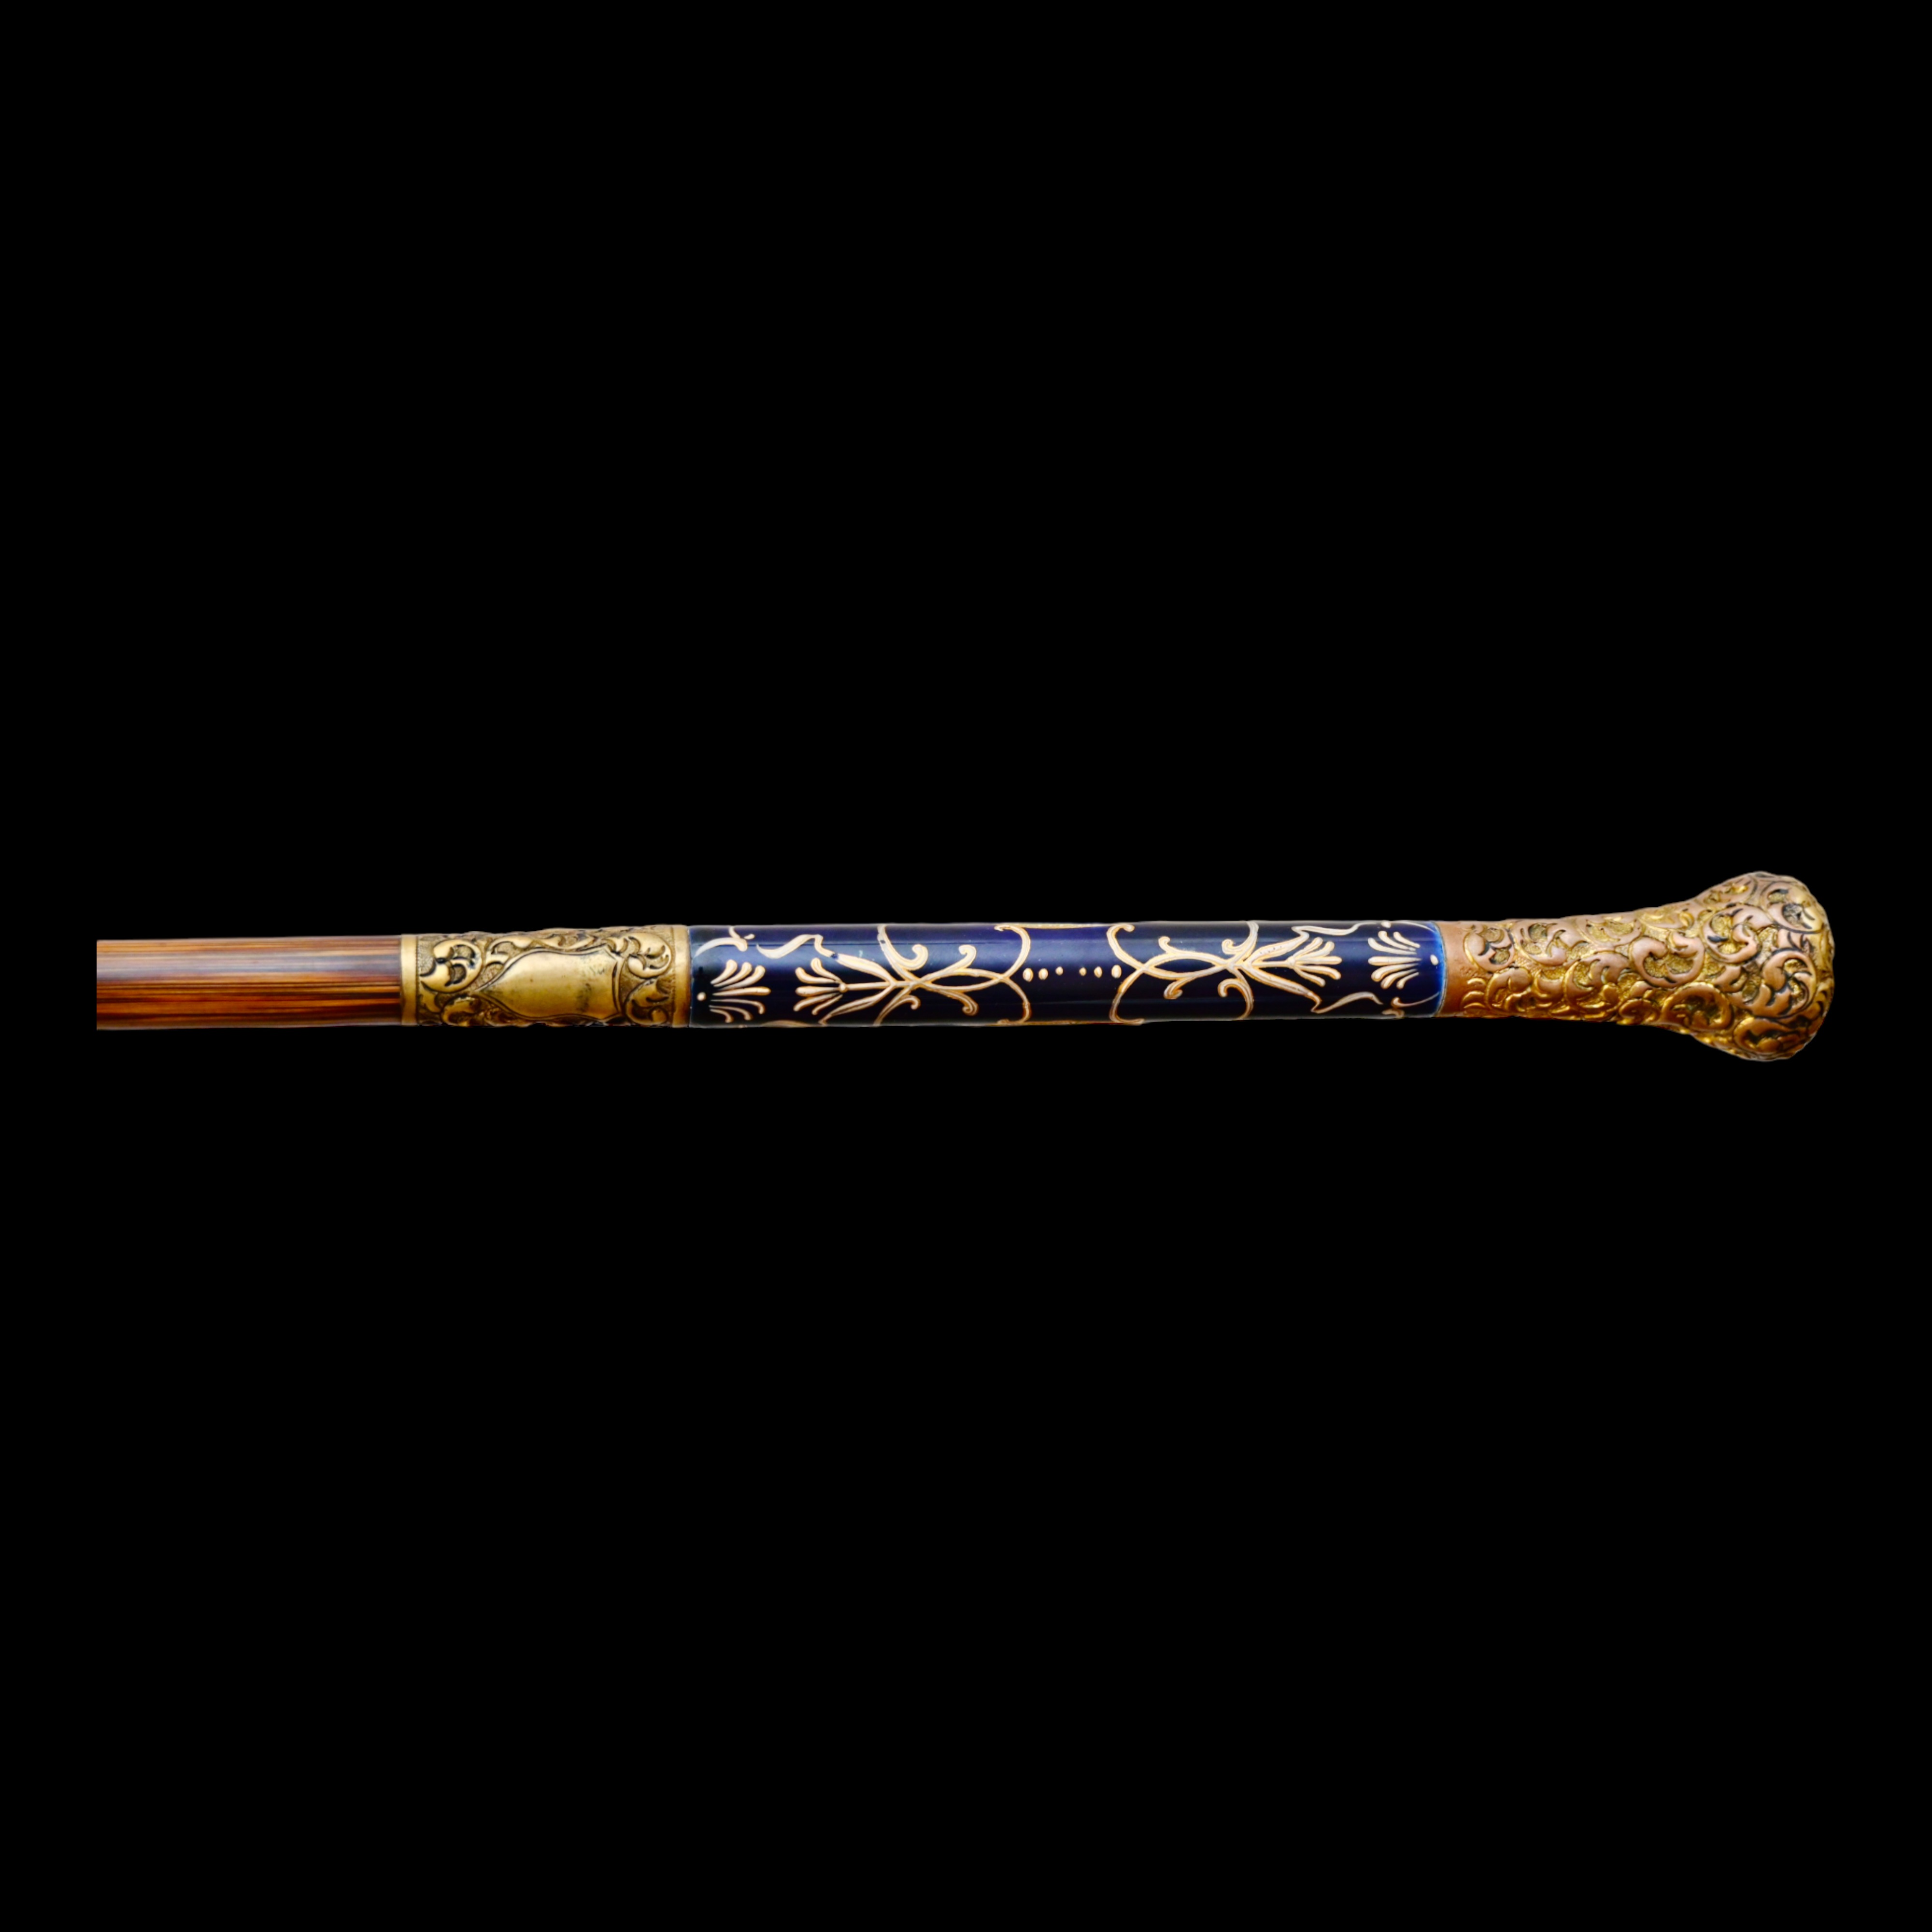 Rare Cane with Porcelain part. Limoge Porcelain Manufactory. France, 19th century. - Image 7 of 12